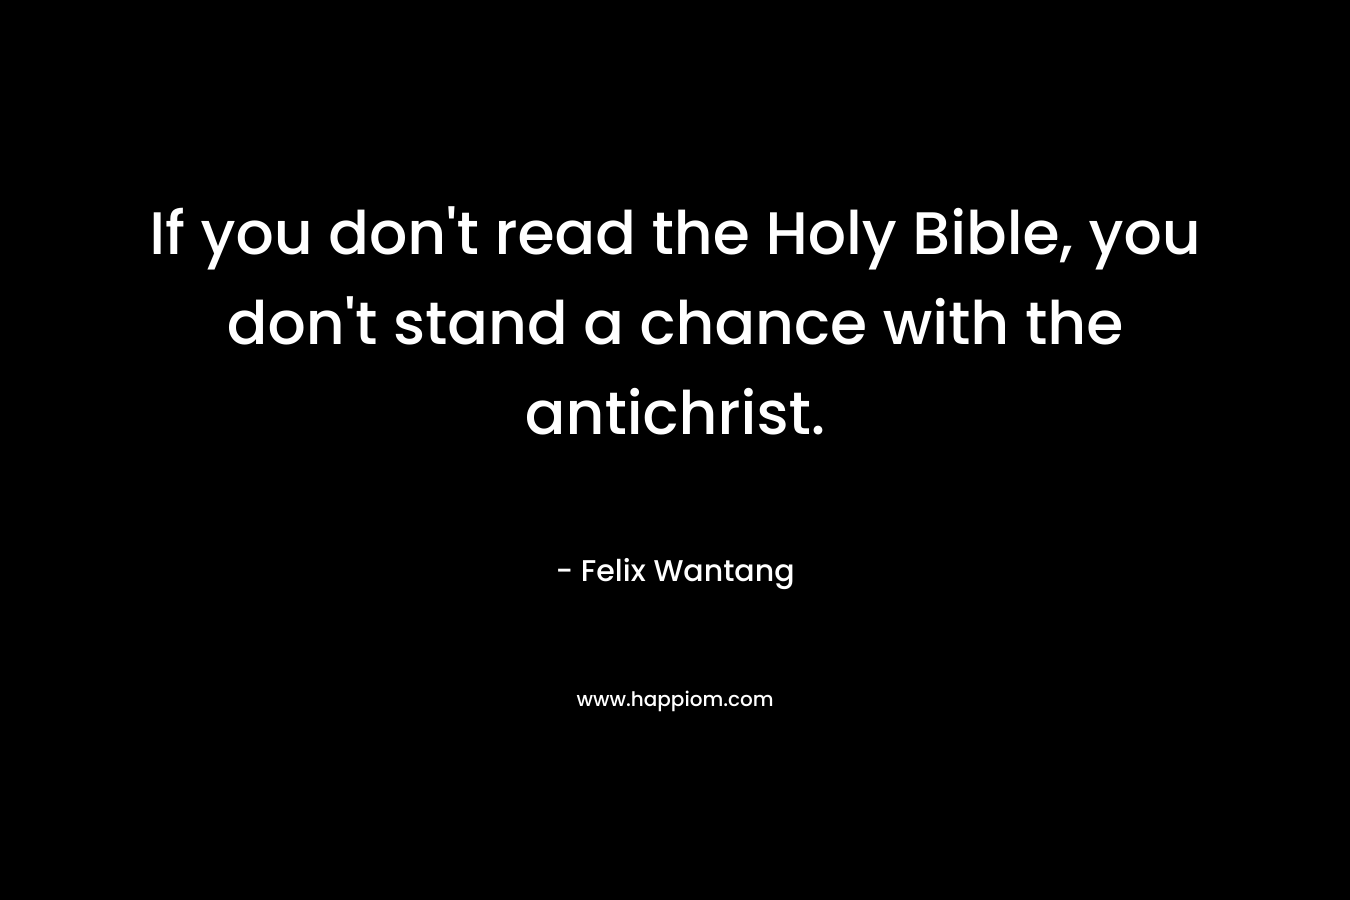 If you don't read the Holy Bible, you don't stand a chance with the antichrist.